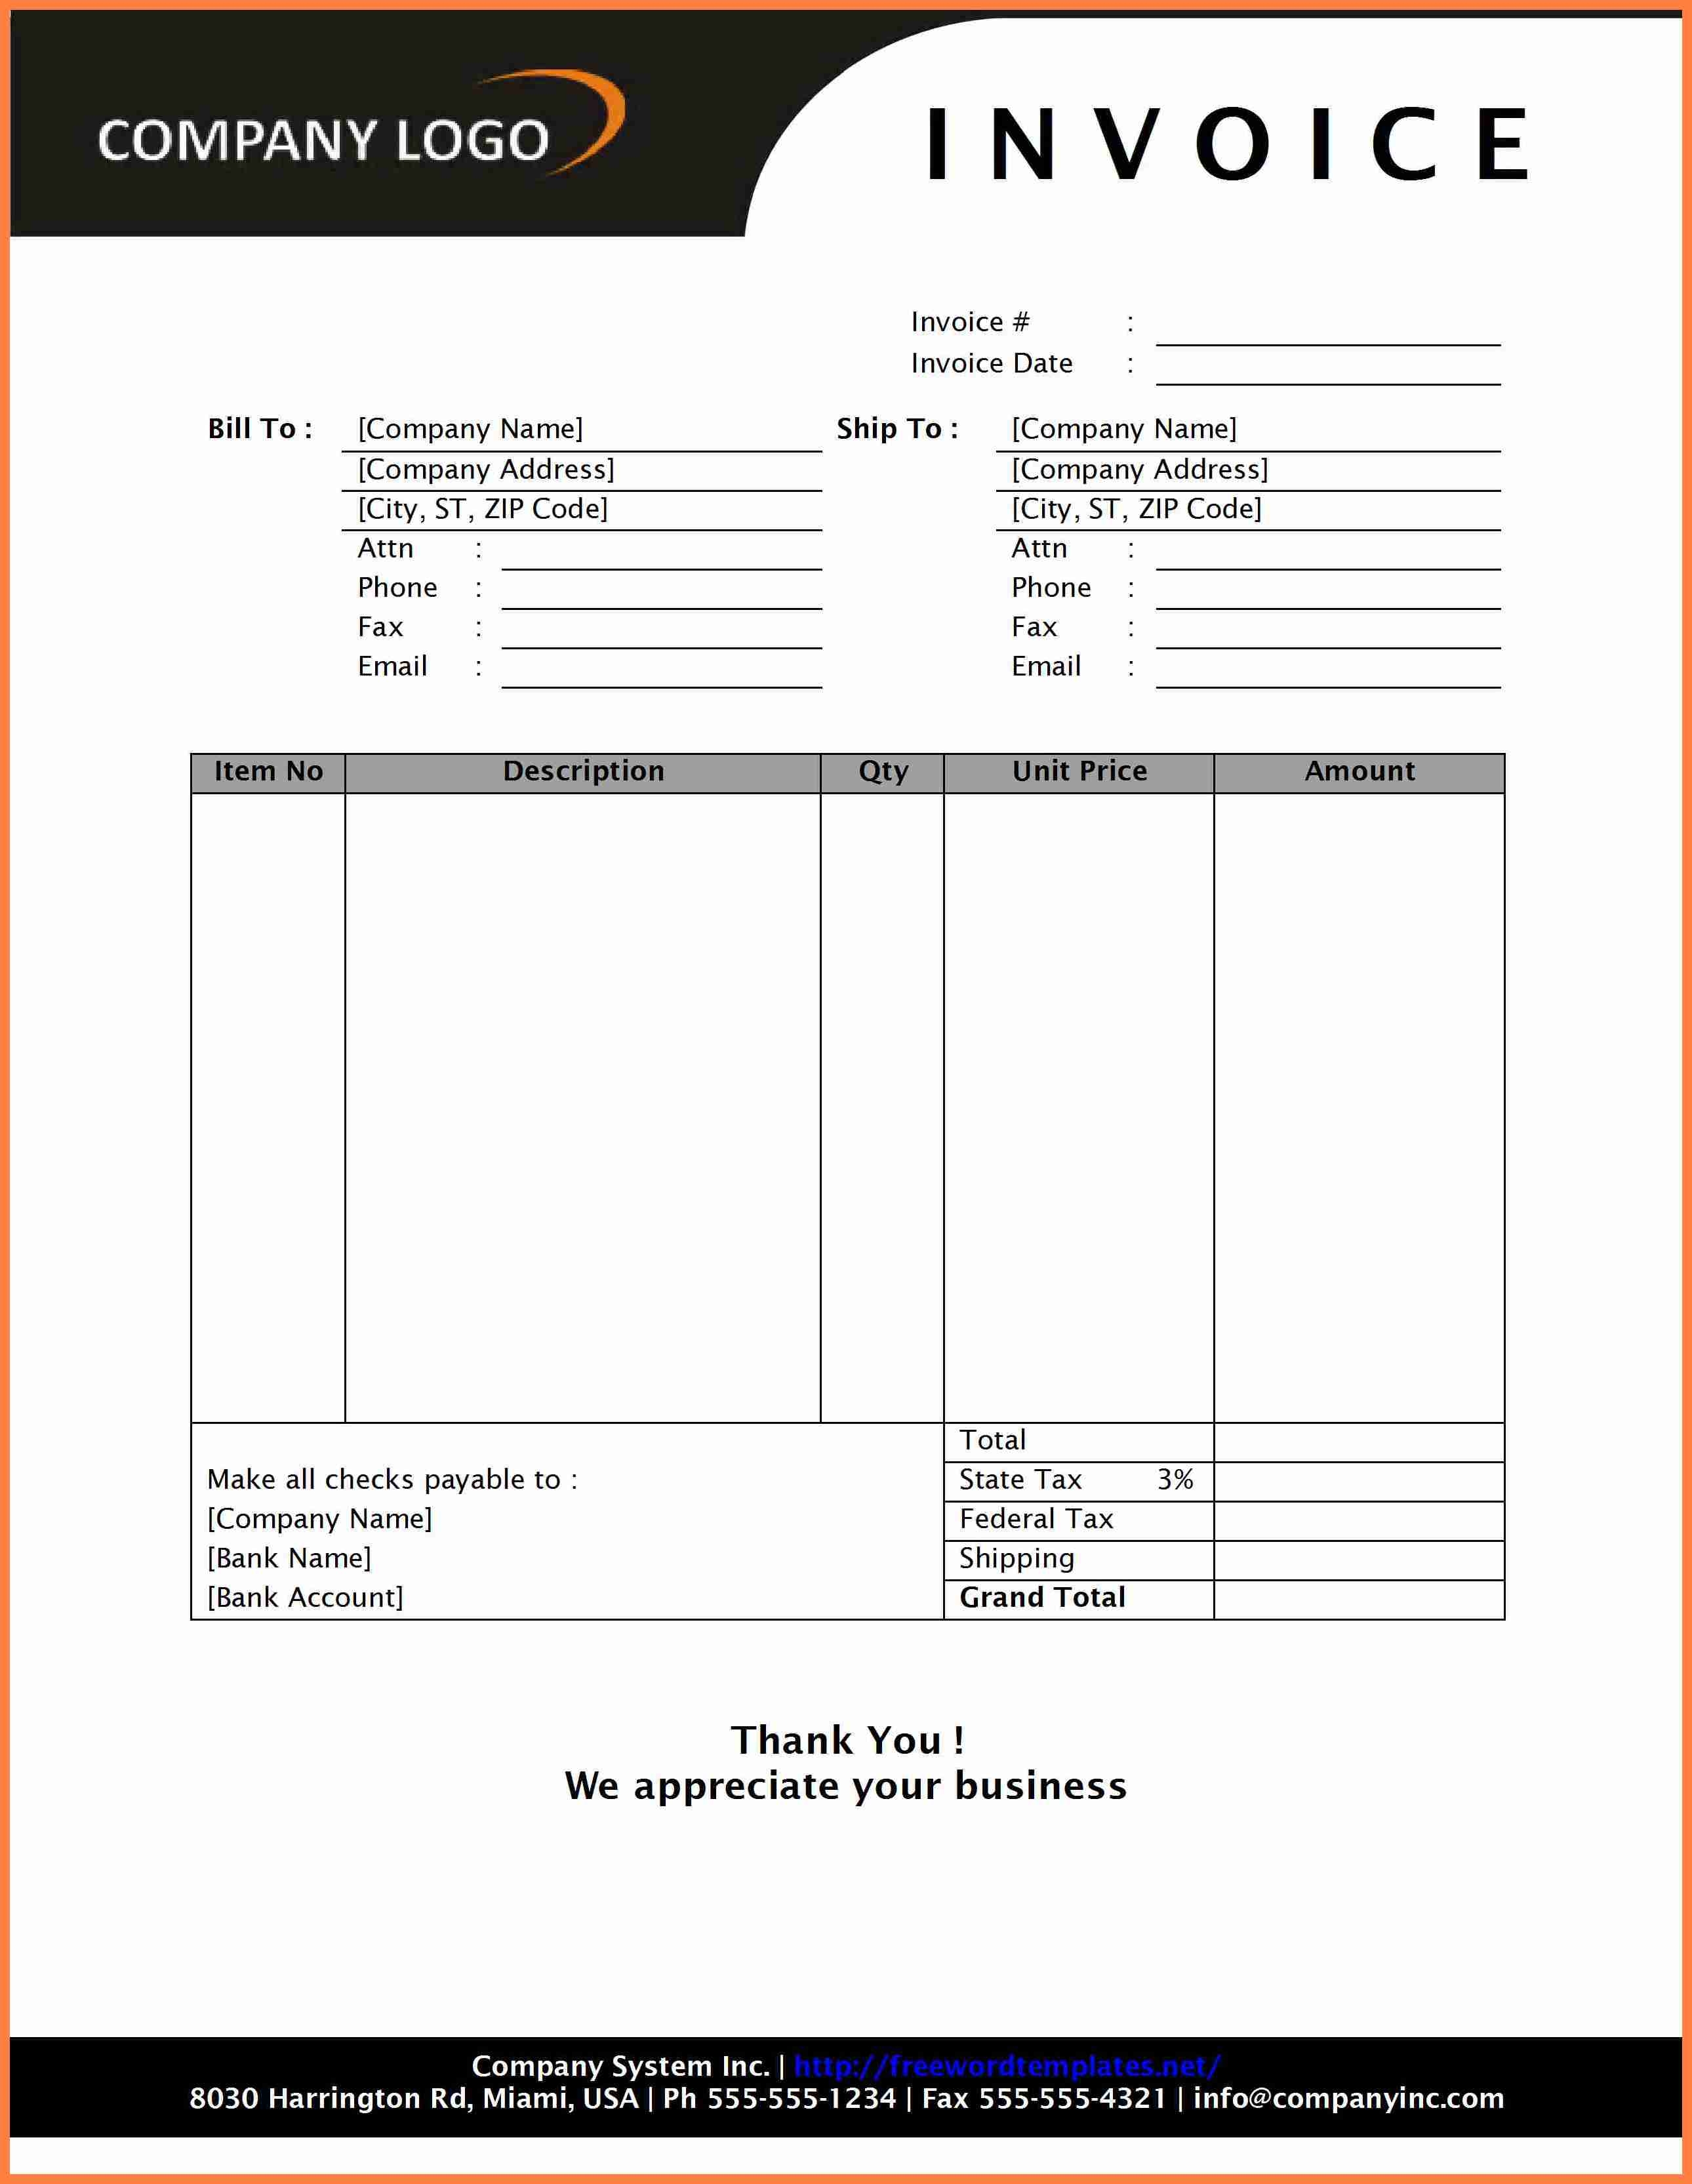 invoice format in word free download invoice template word document mdxar 2580 X 3330